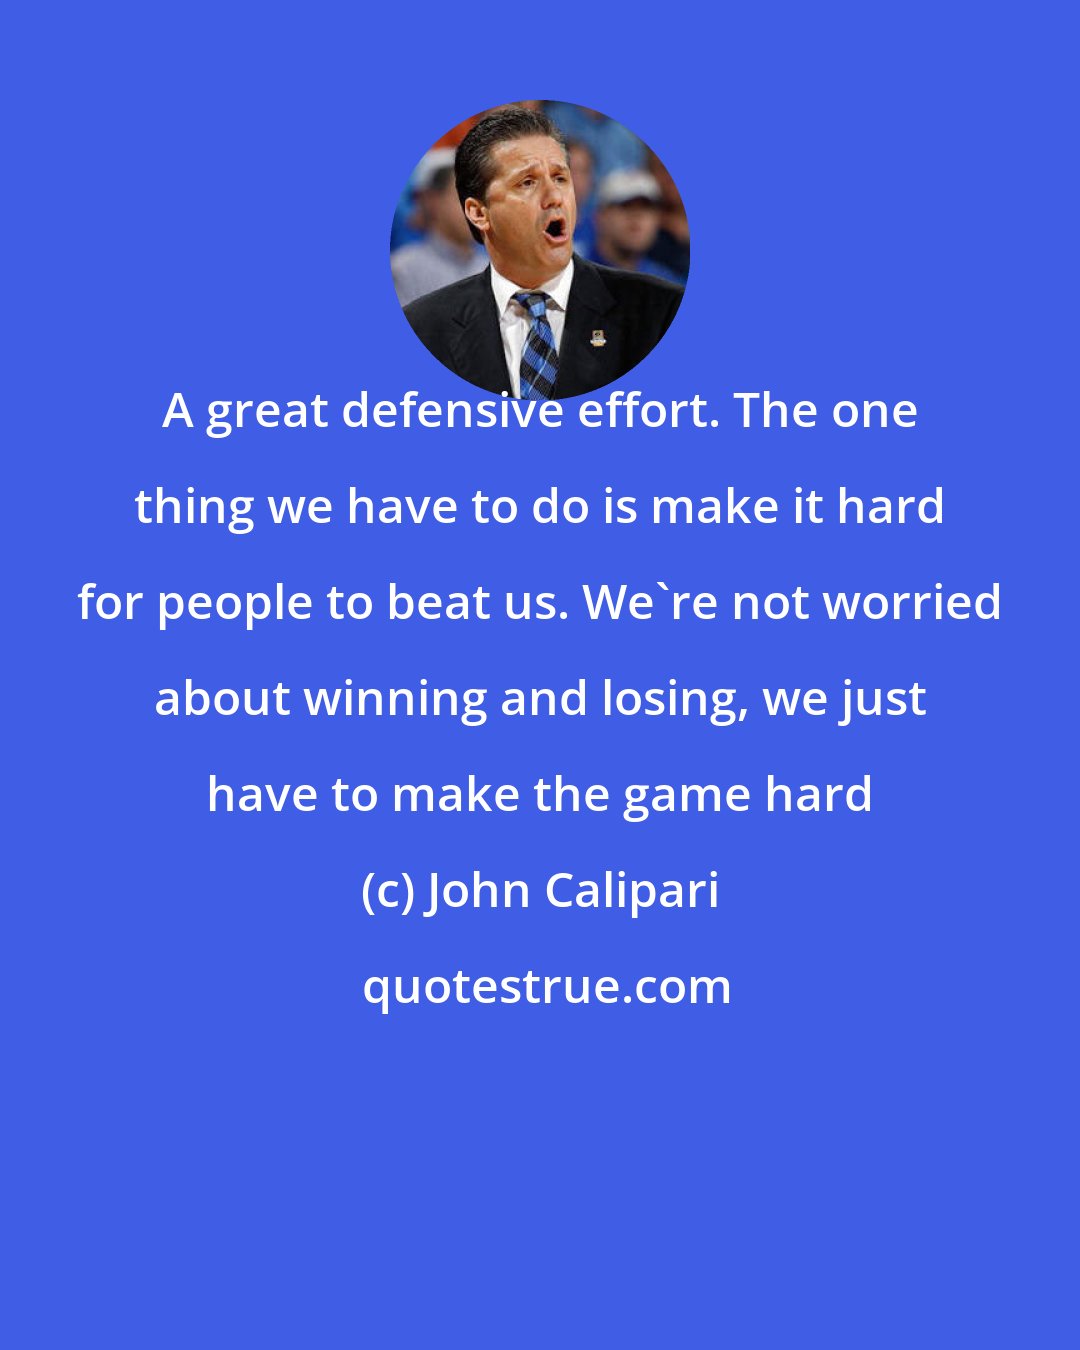 John Calipari: A great defensive effort. The one thing we have to do is make it hard for people to beat us. We're not worried about winning and losing, we just have to make the game hard